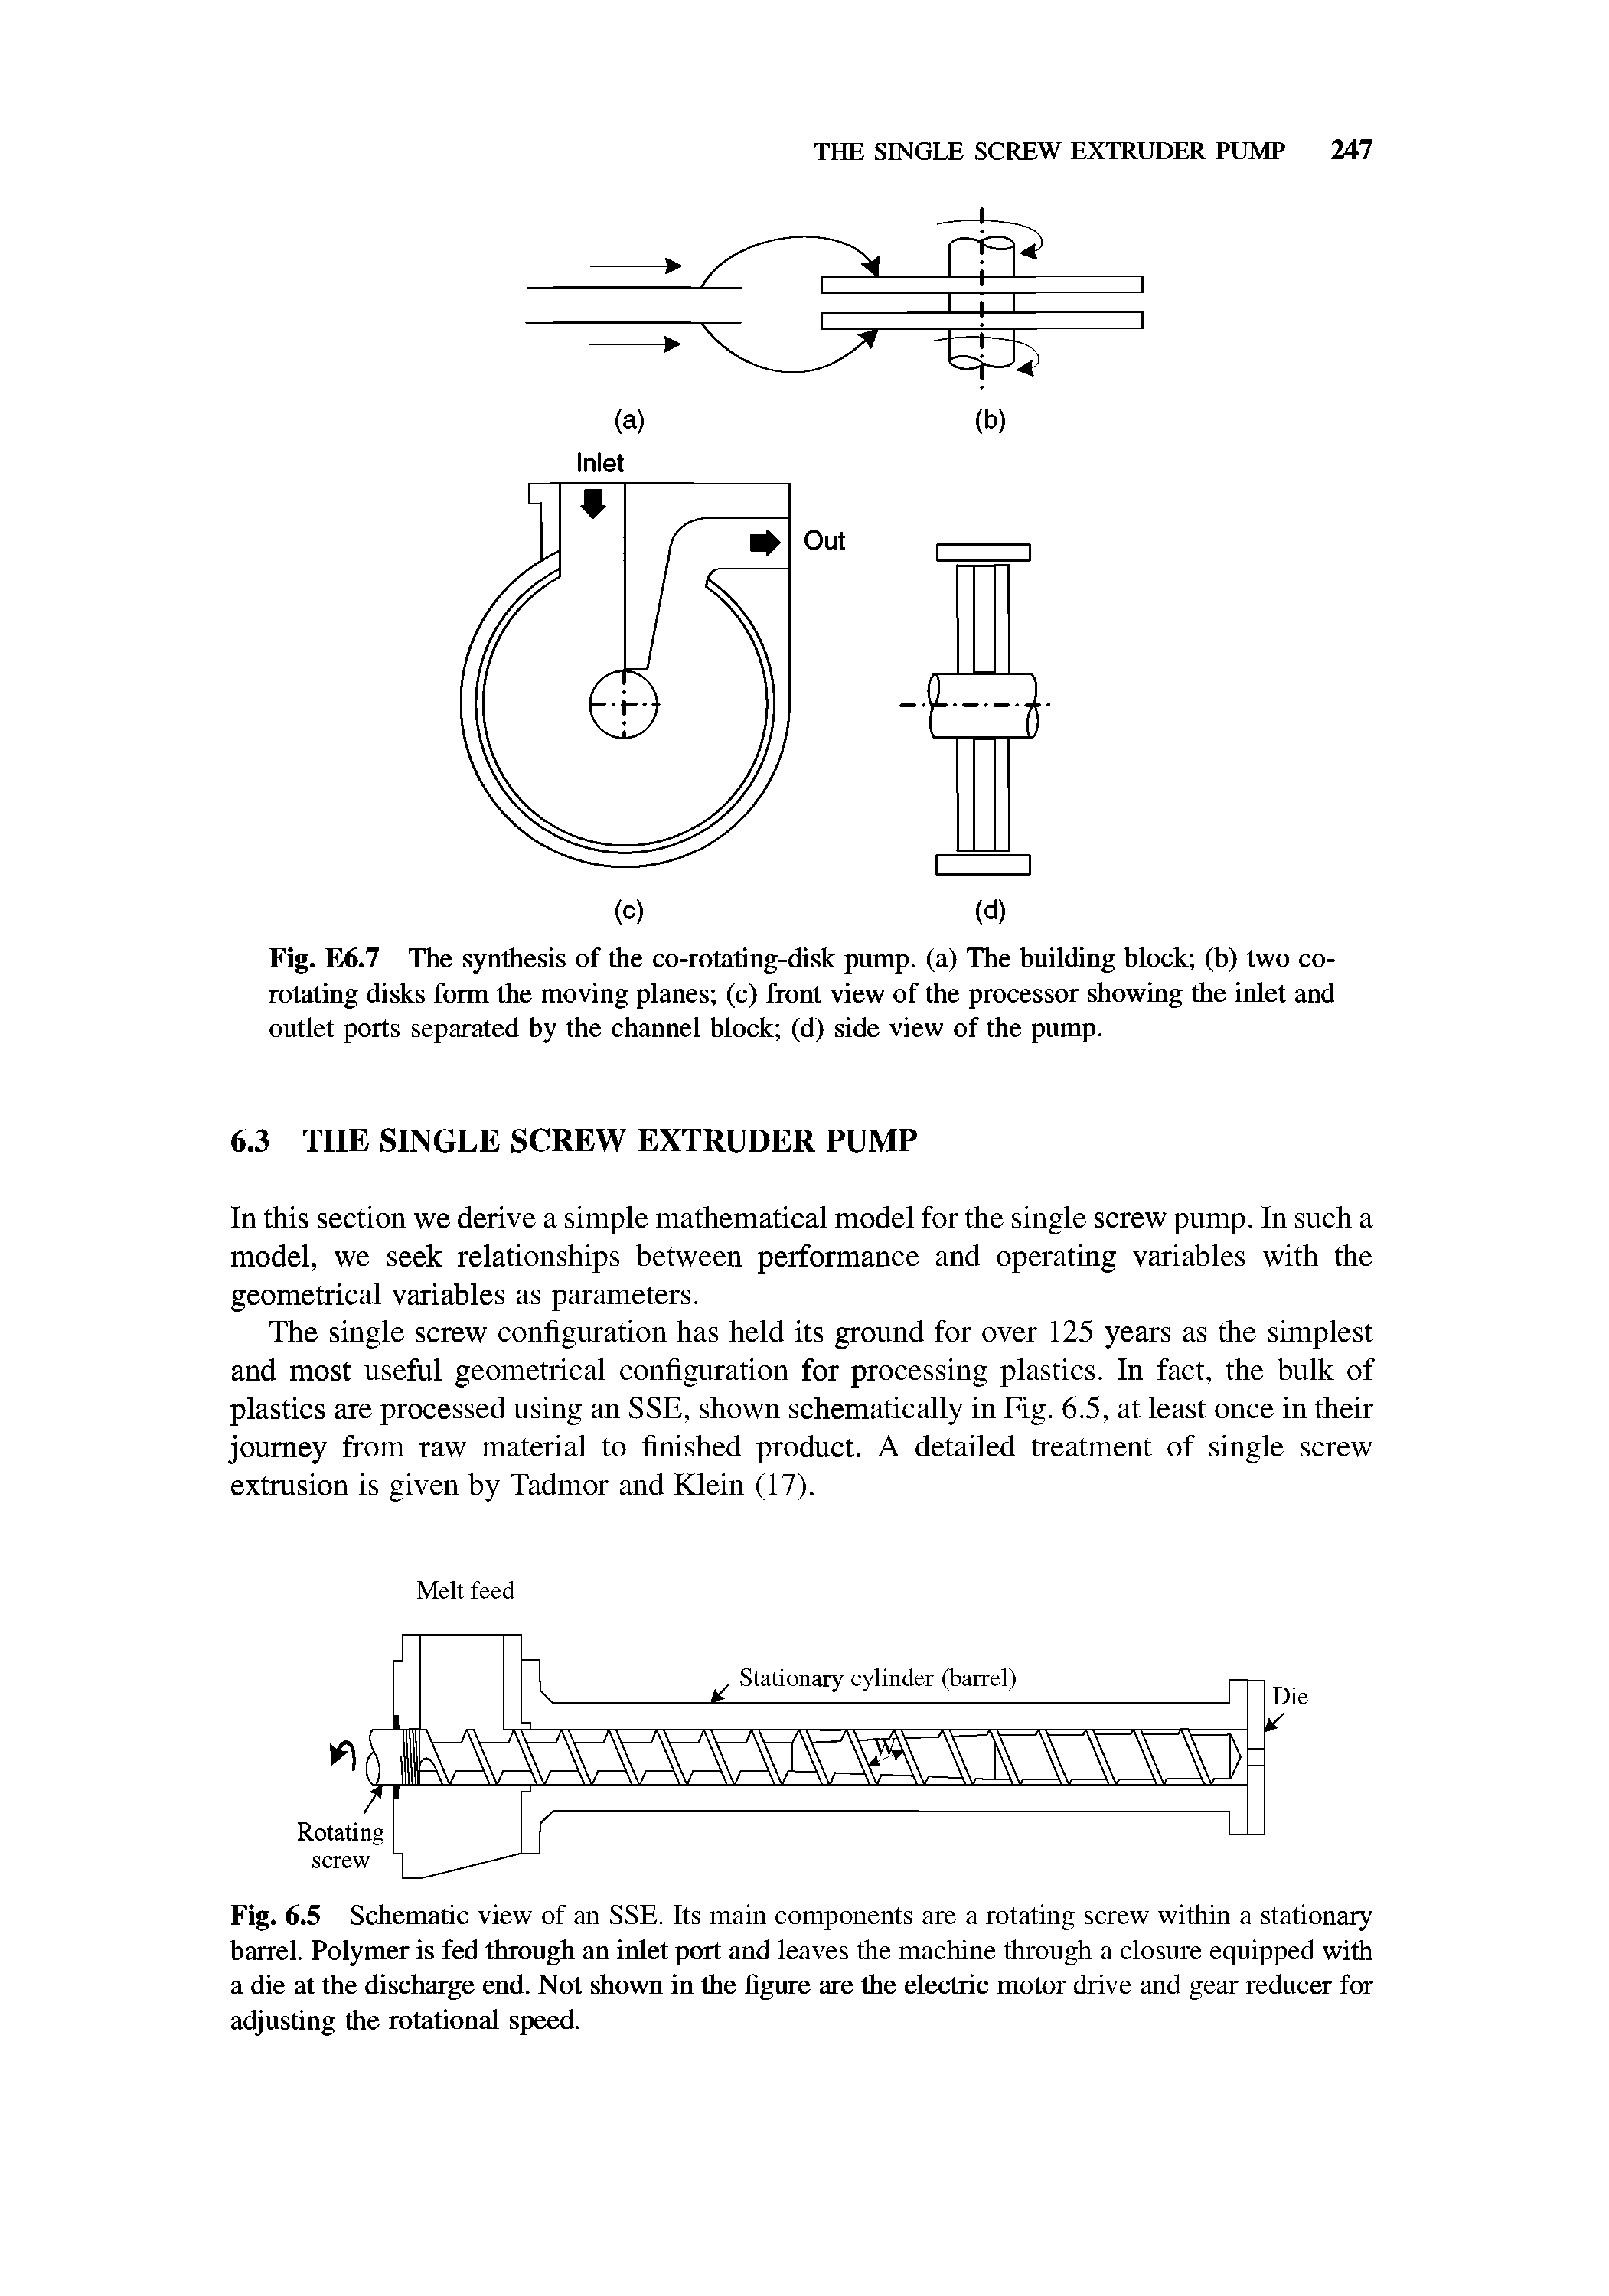 Fig. 6.5 Schematic view of an SSE. Its main components are a rotating screw within a stationary barrel. Polymer is fed through an inlet port and leaves the machine through a closure equipped with a die at the discharge end. Not shown in the figure are the electric motor drive and gear reducer for adjusting the rotational speed.